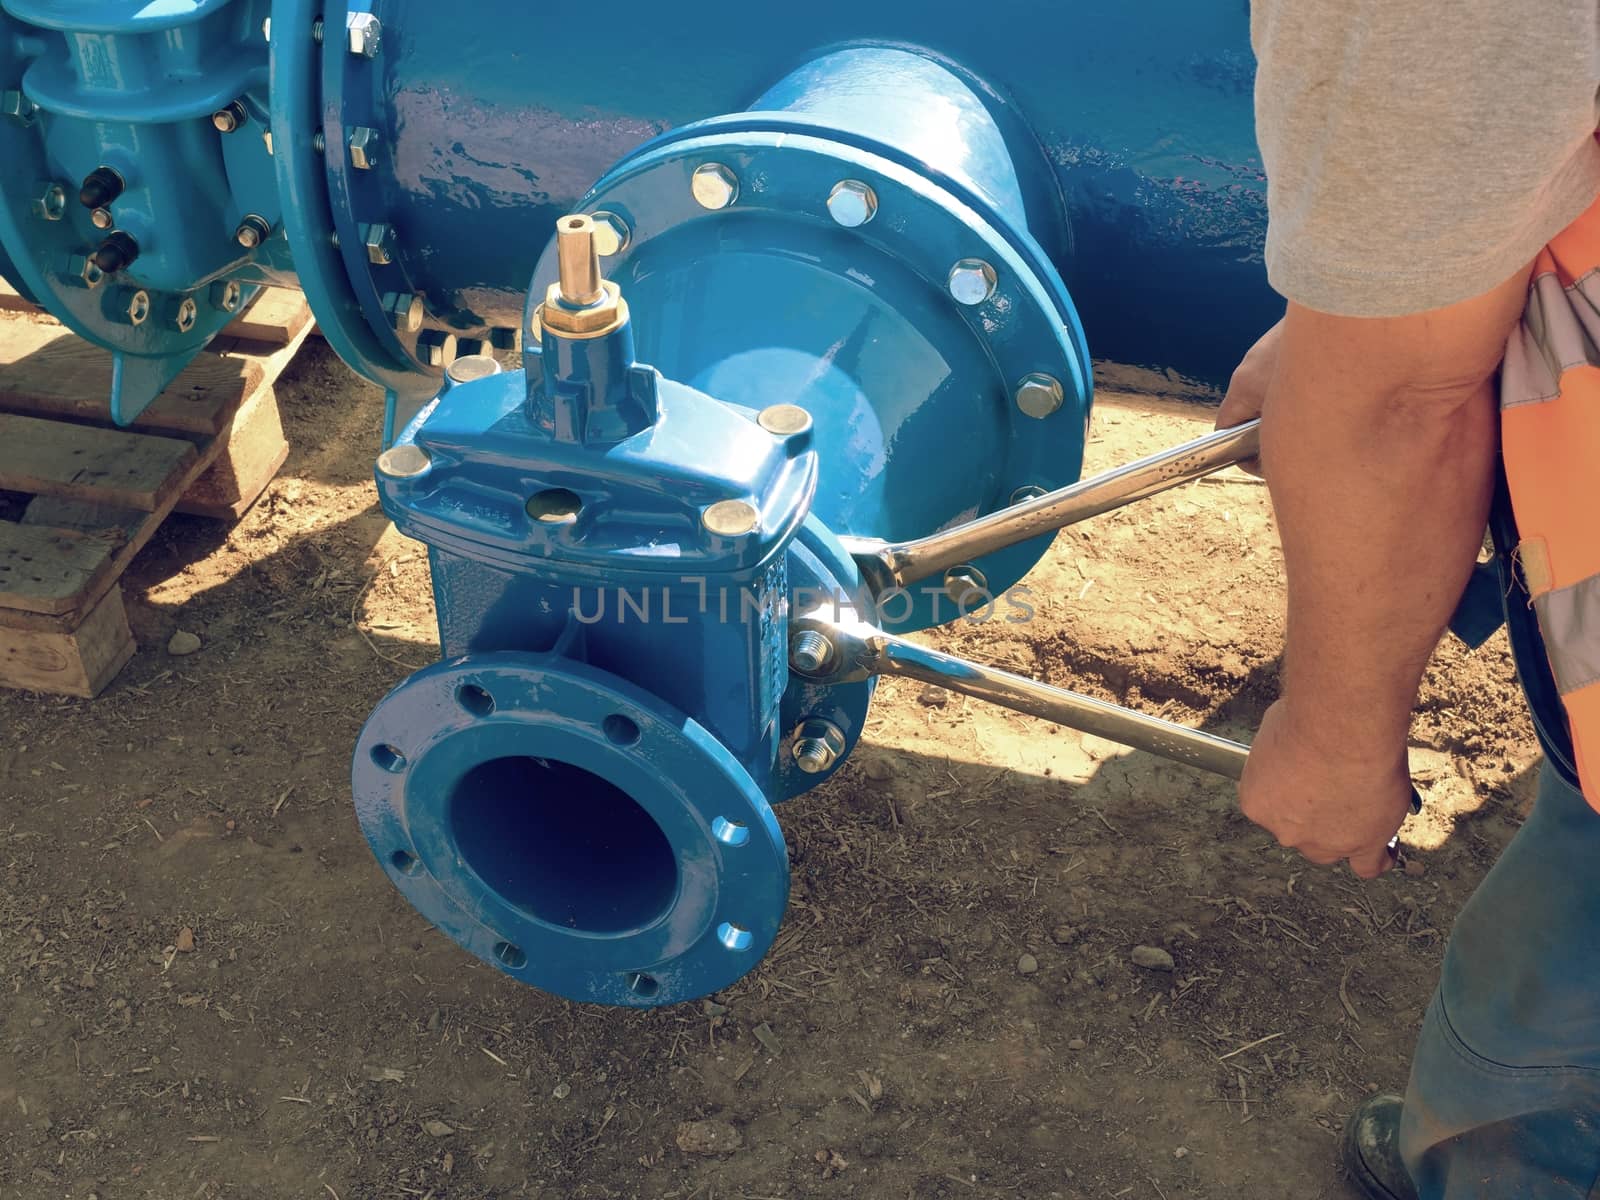 Worker hands screwing Gate valve with nuts on piping. by rdonar2